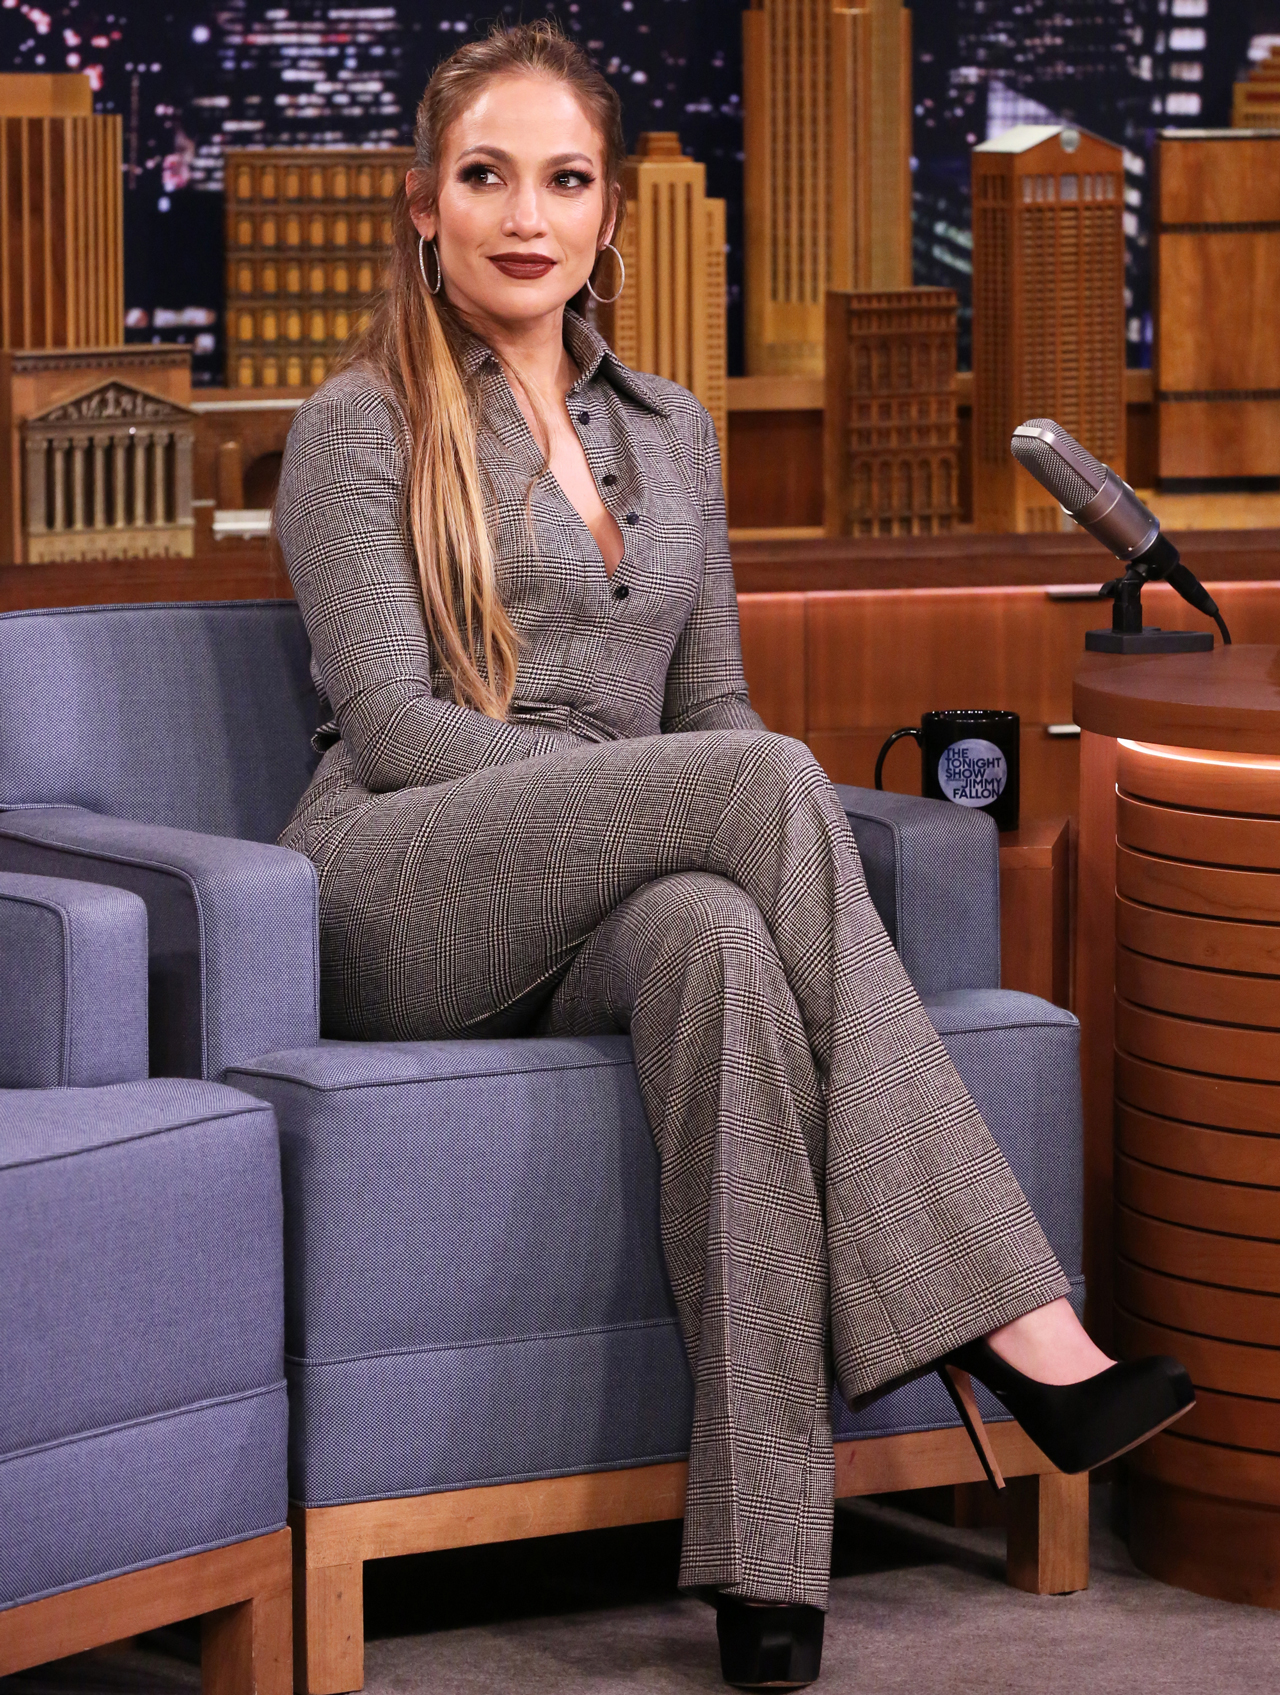 Jennifer Lopez Slayed the Fashion Game With 8 Stunning Outfits in 48 Hours -- See the Pics!